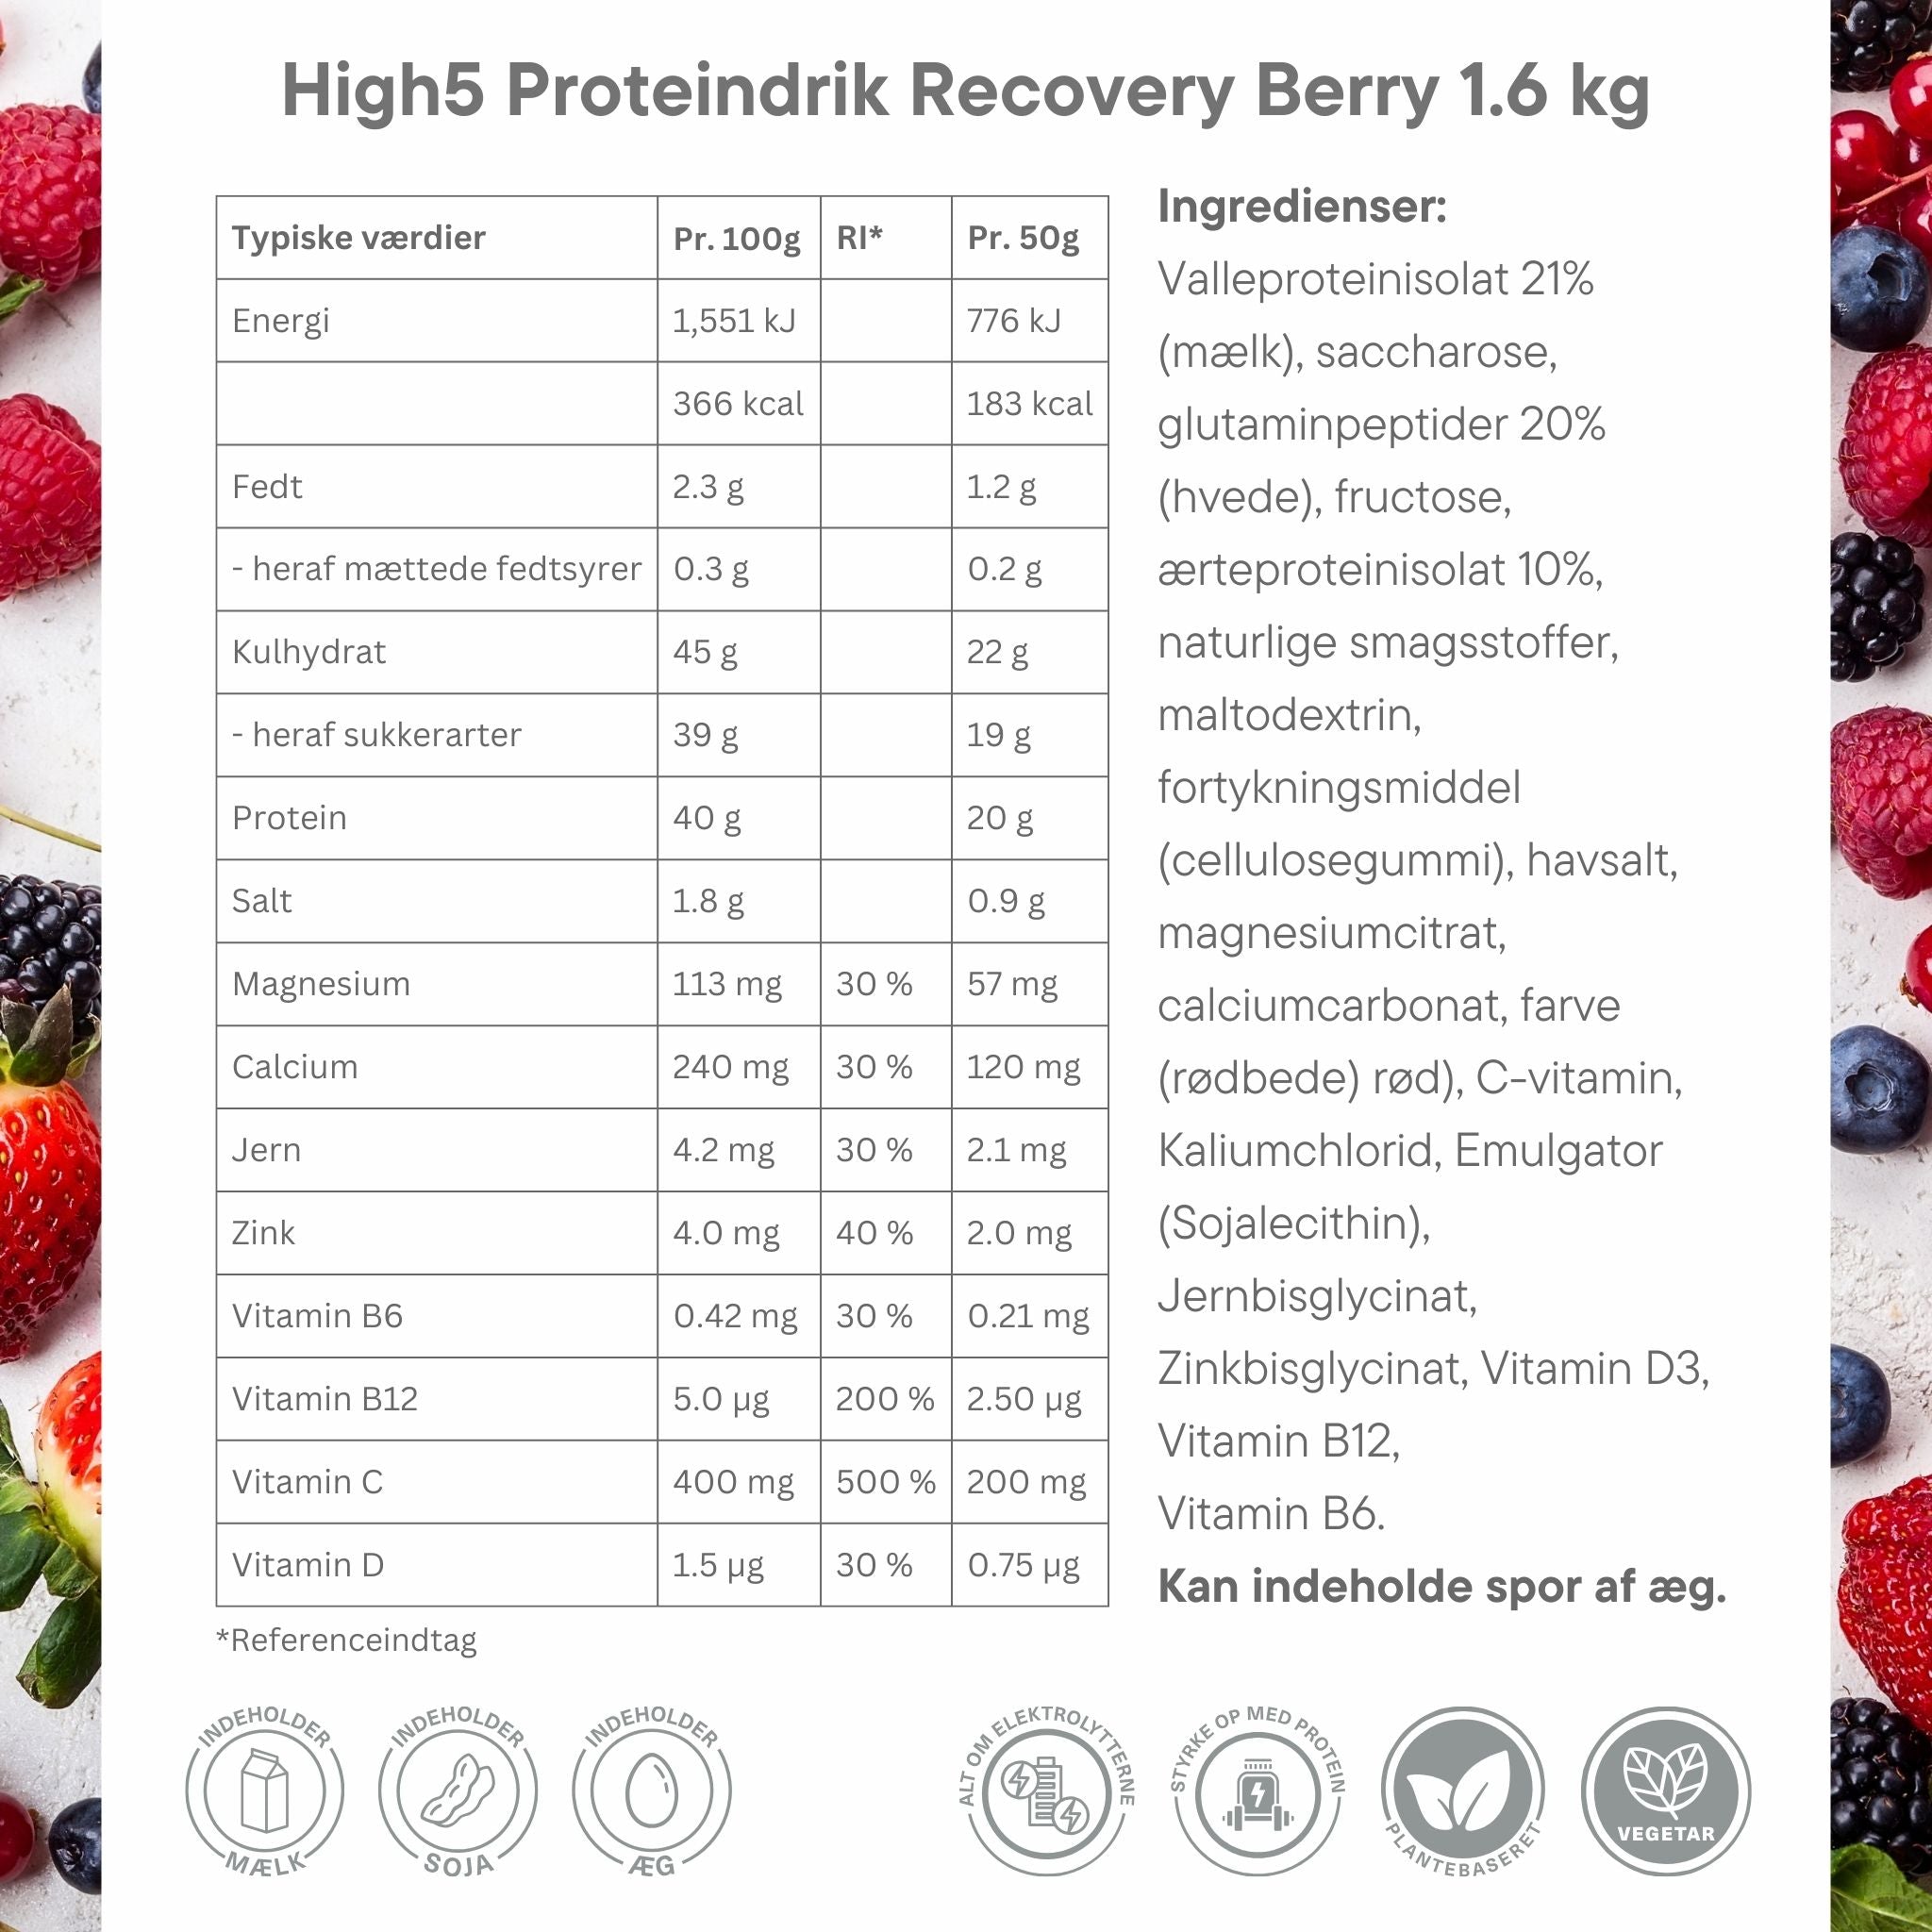 High5 Proteindrik Recovery Berry 1.6 kg - DATOVARE